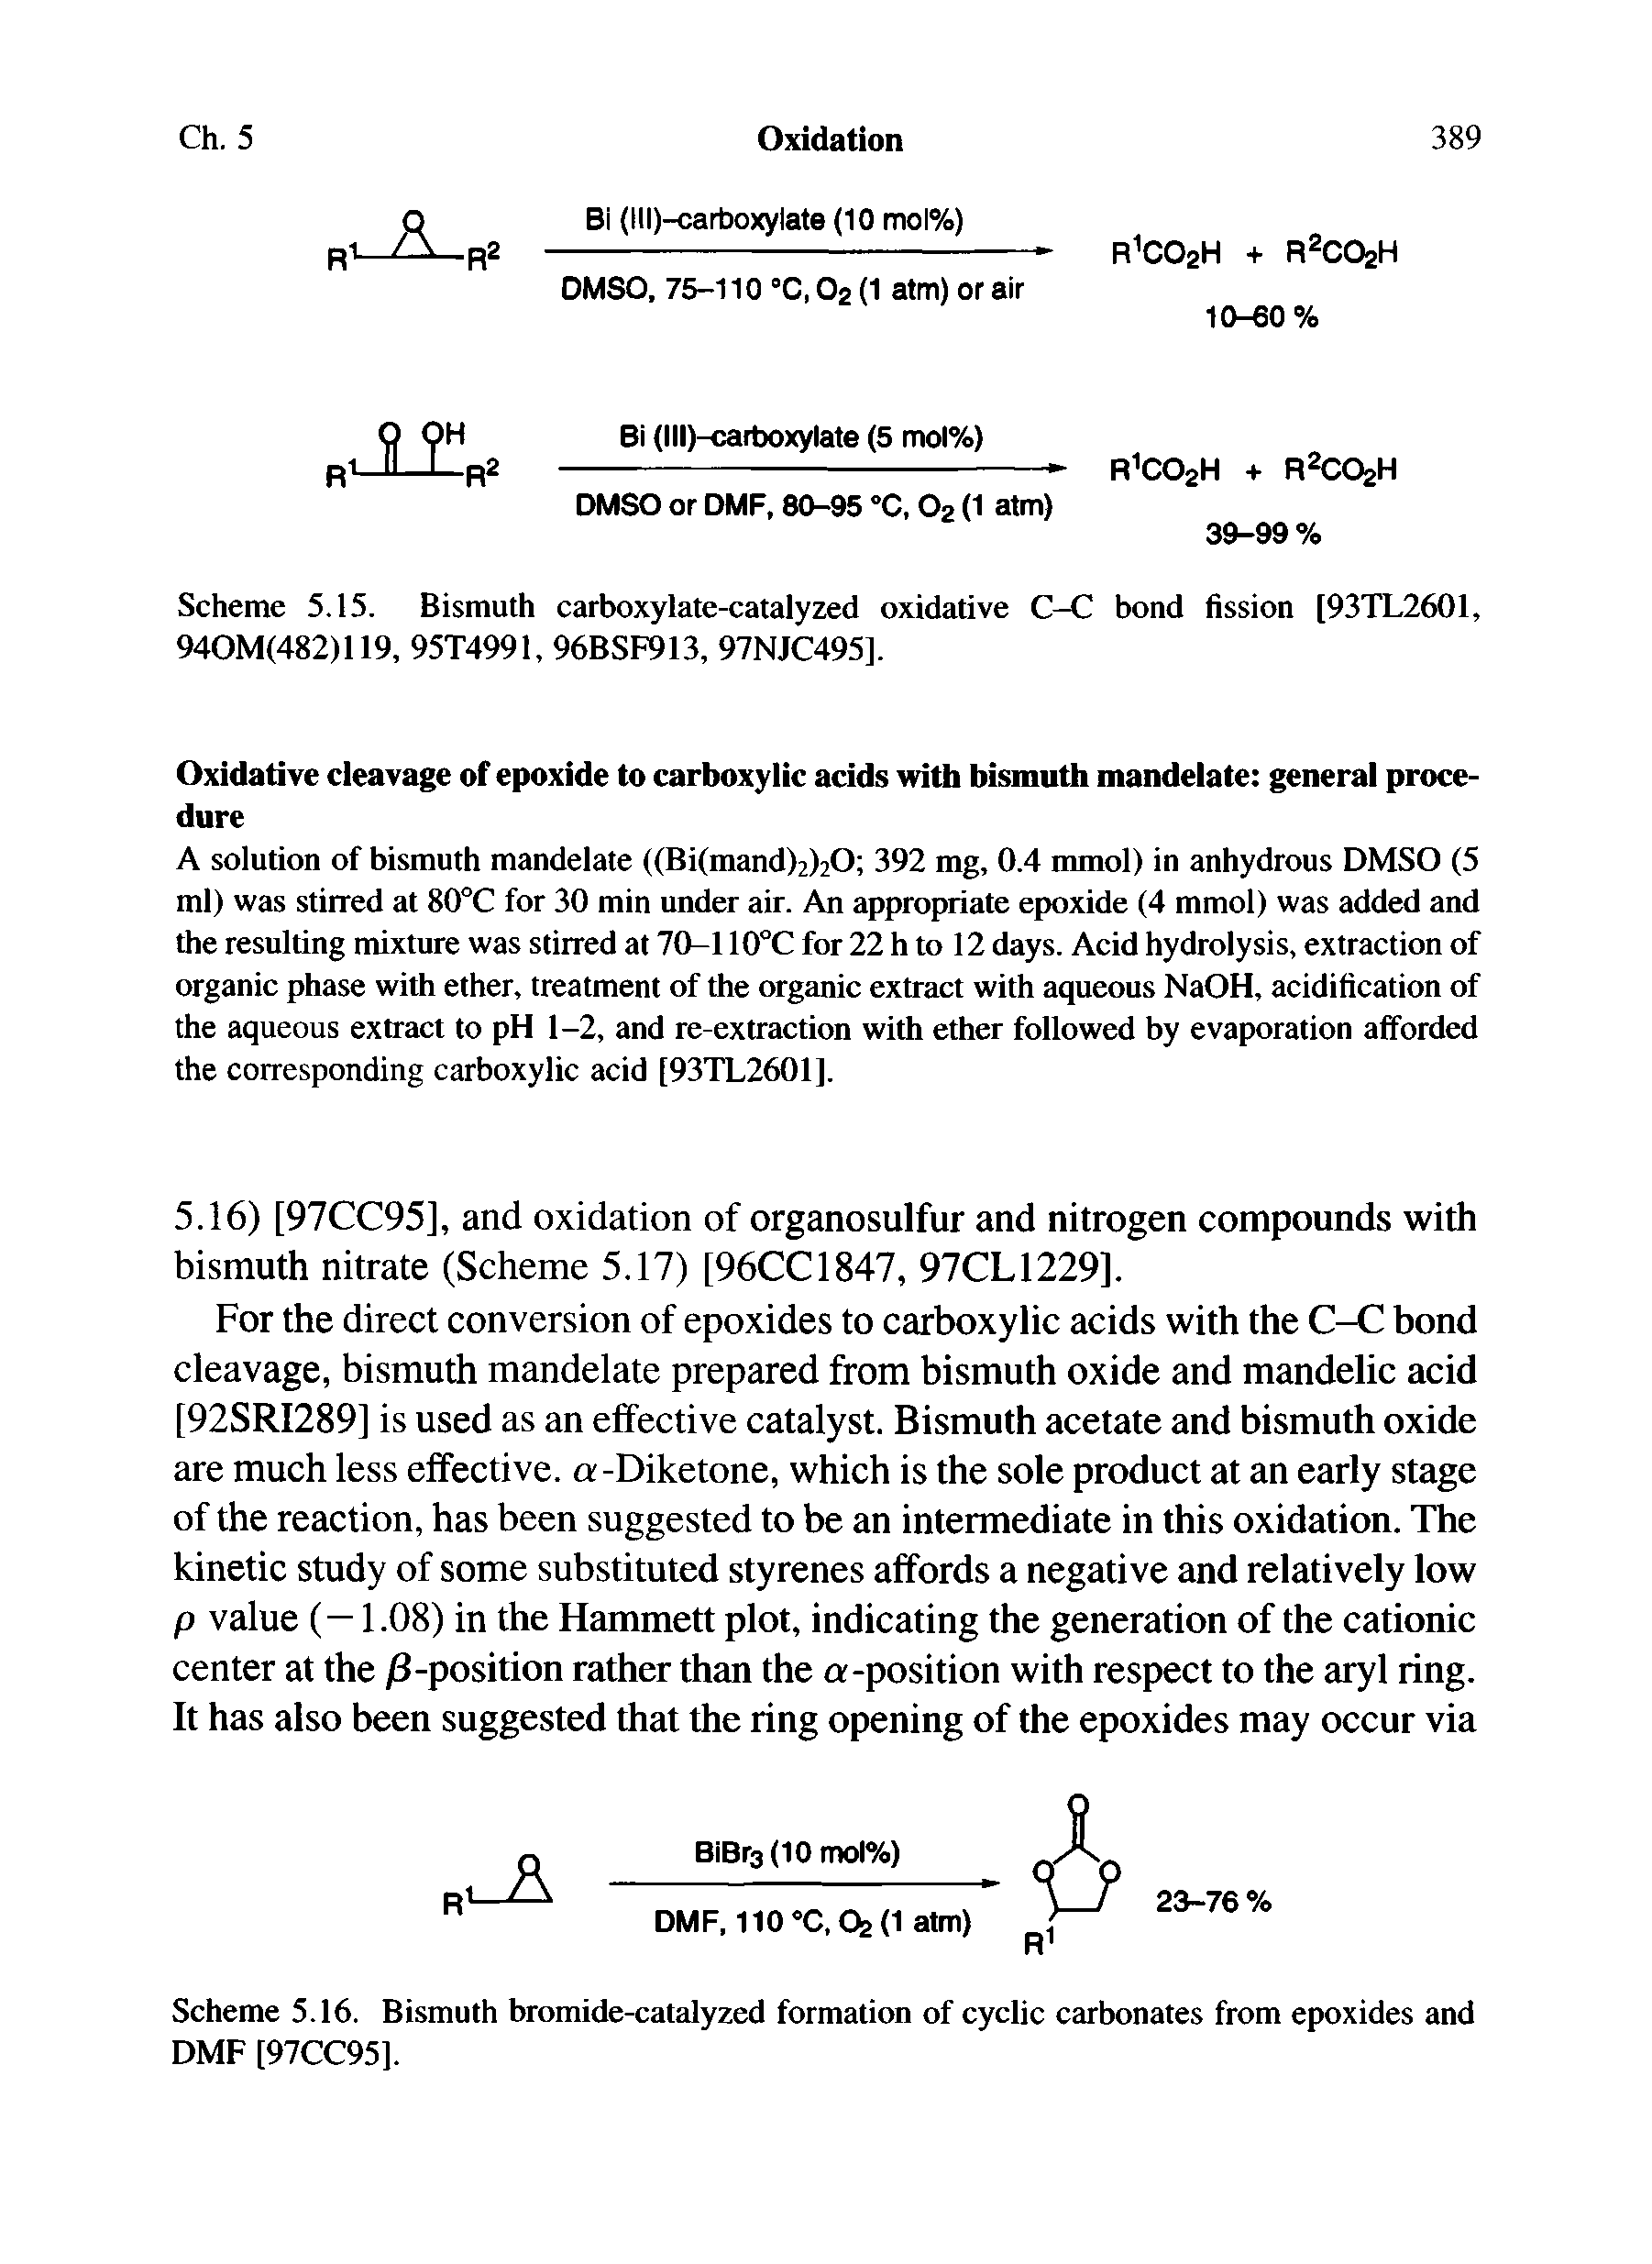 Scheme 5.16. Bismuth bromide-catalyzed formation of cyclic carbonates from epoxides and DMF [97CC95].